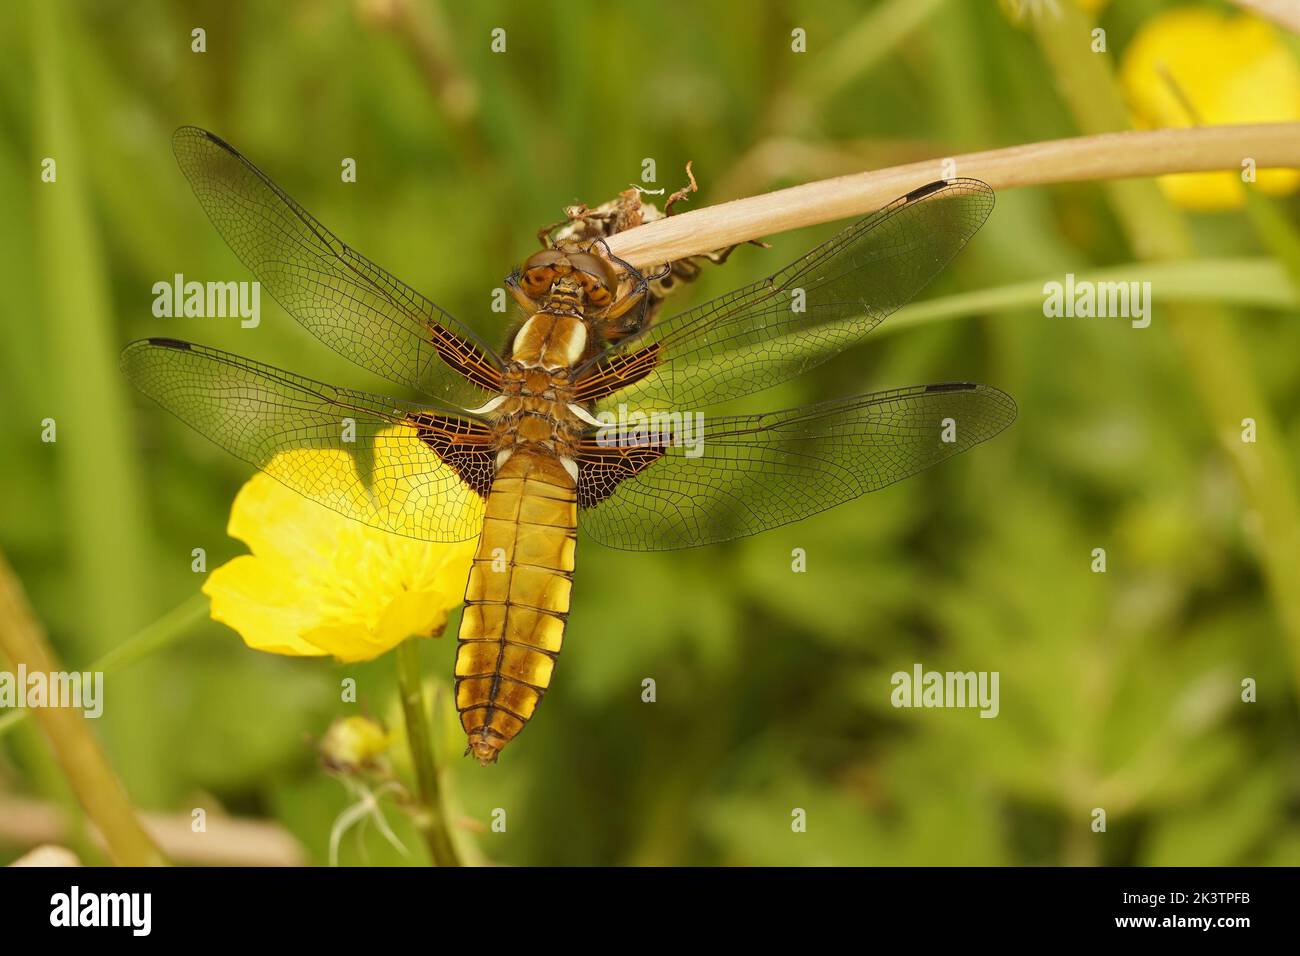 Facial detailed closeup on a female broad-bodied darter dragonfly, Libellula depressa hanging on a twig Stock Photo